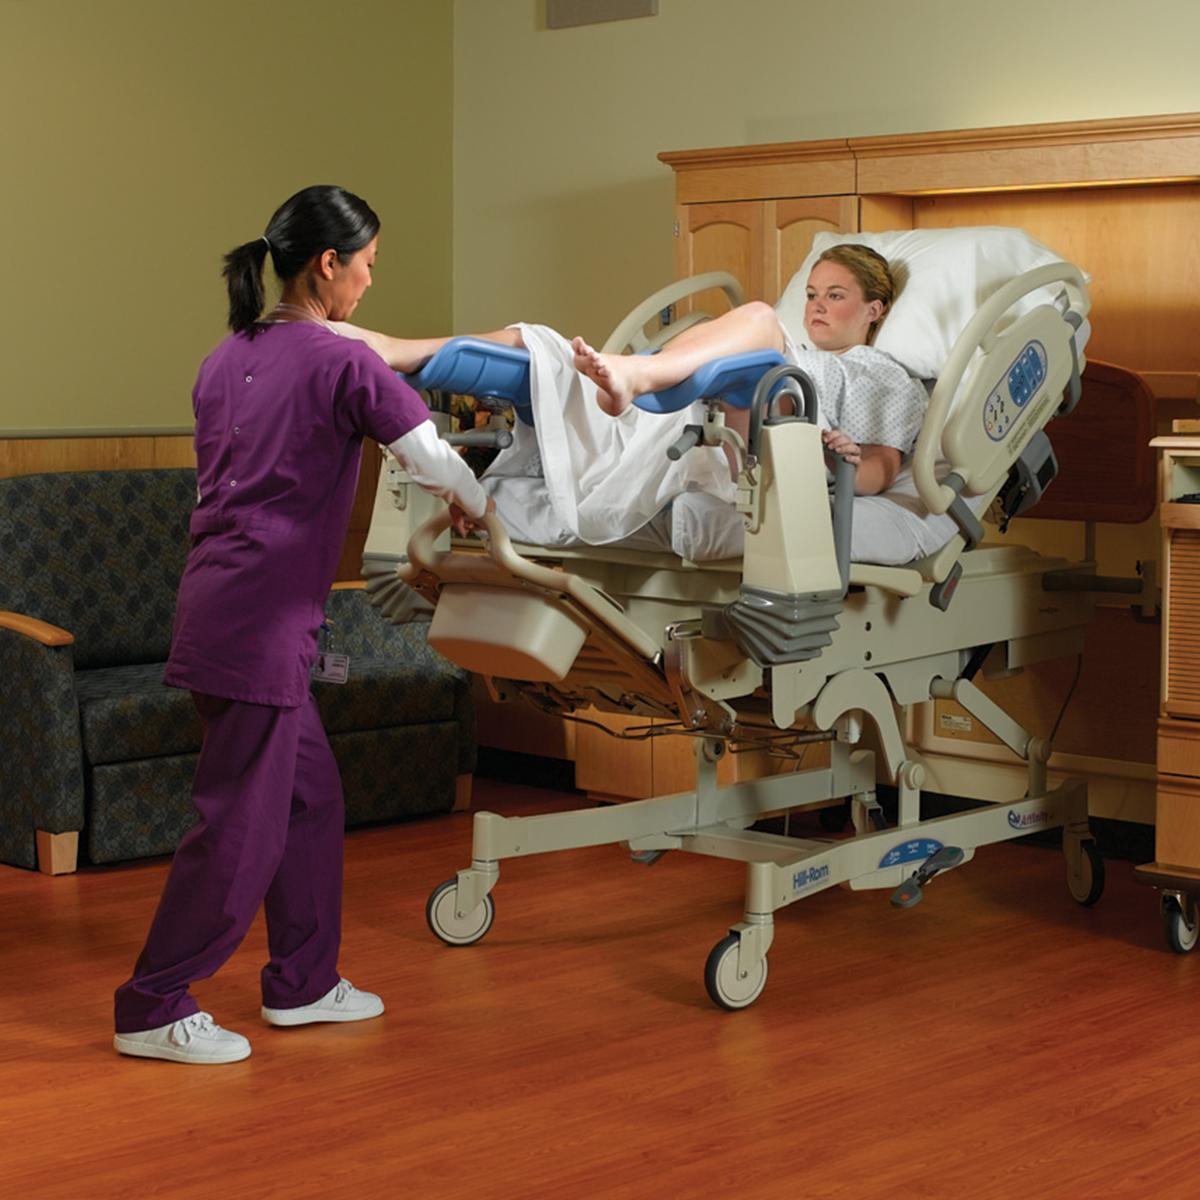 A nurse adjusts the foot section of the Affinity 4 Birthing Bed. A patient is in the bed, using the EasyGlide calf supports.